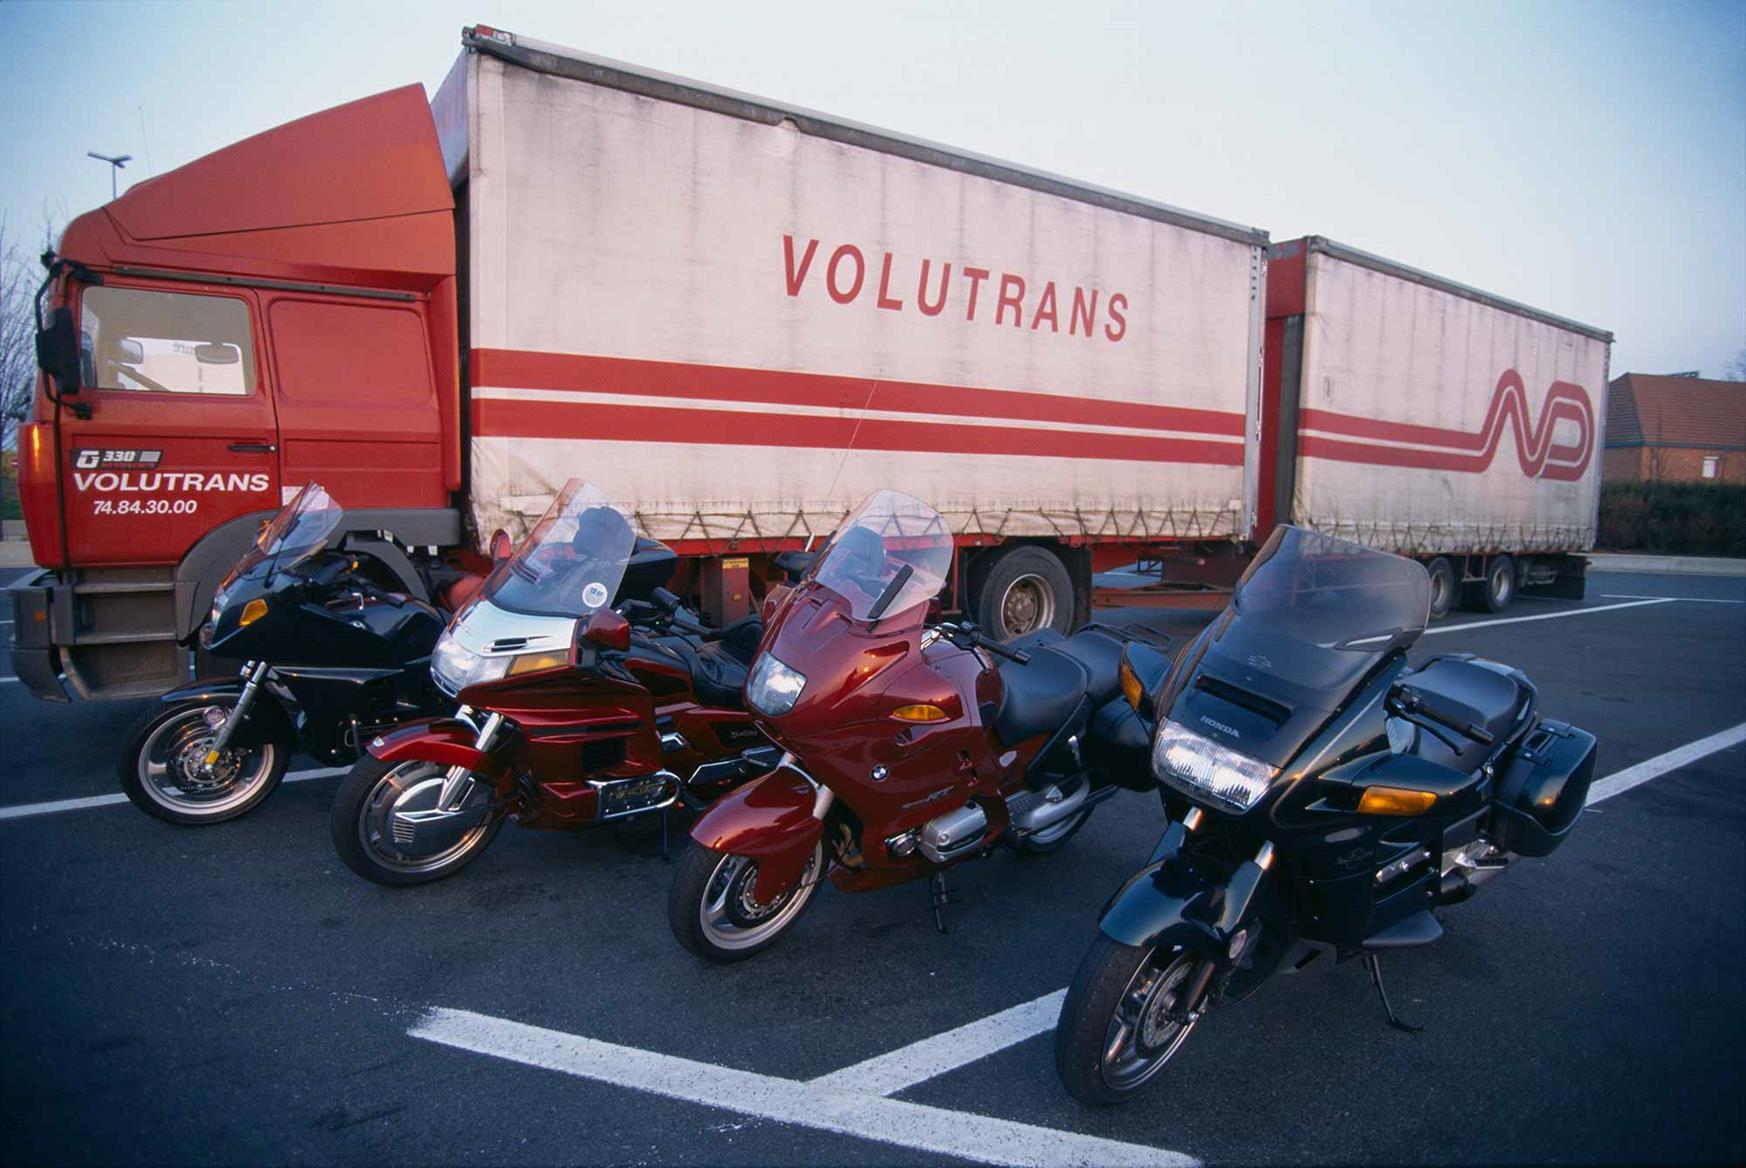 The GL1500 sits alongside its rivals on an MCN road test